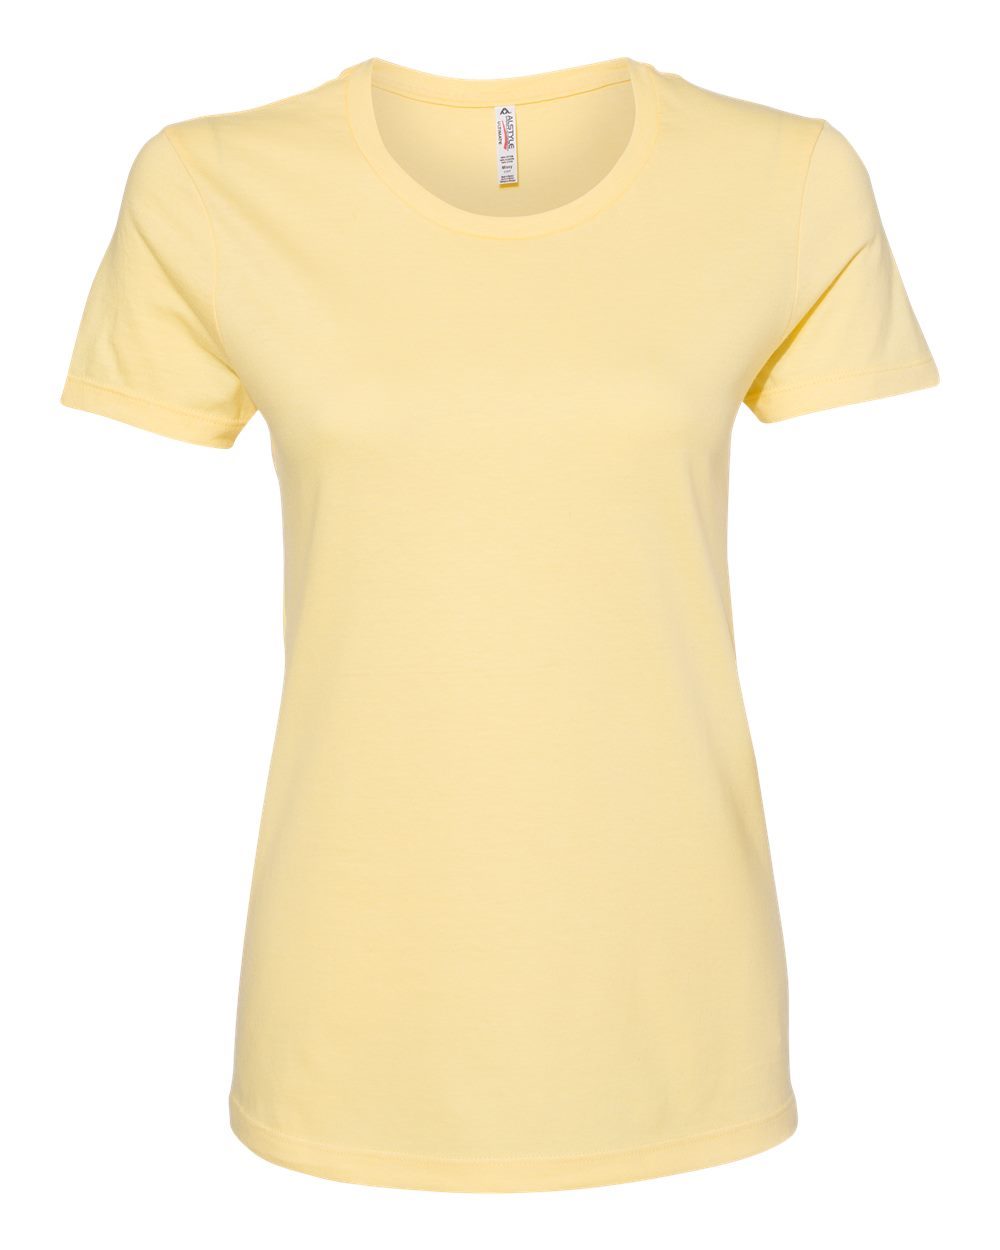 ALSTYLE 2562 - Women’s Ultimate T-Shirt